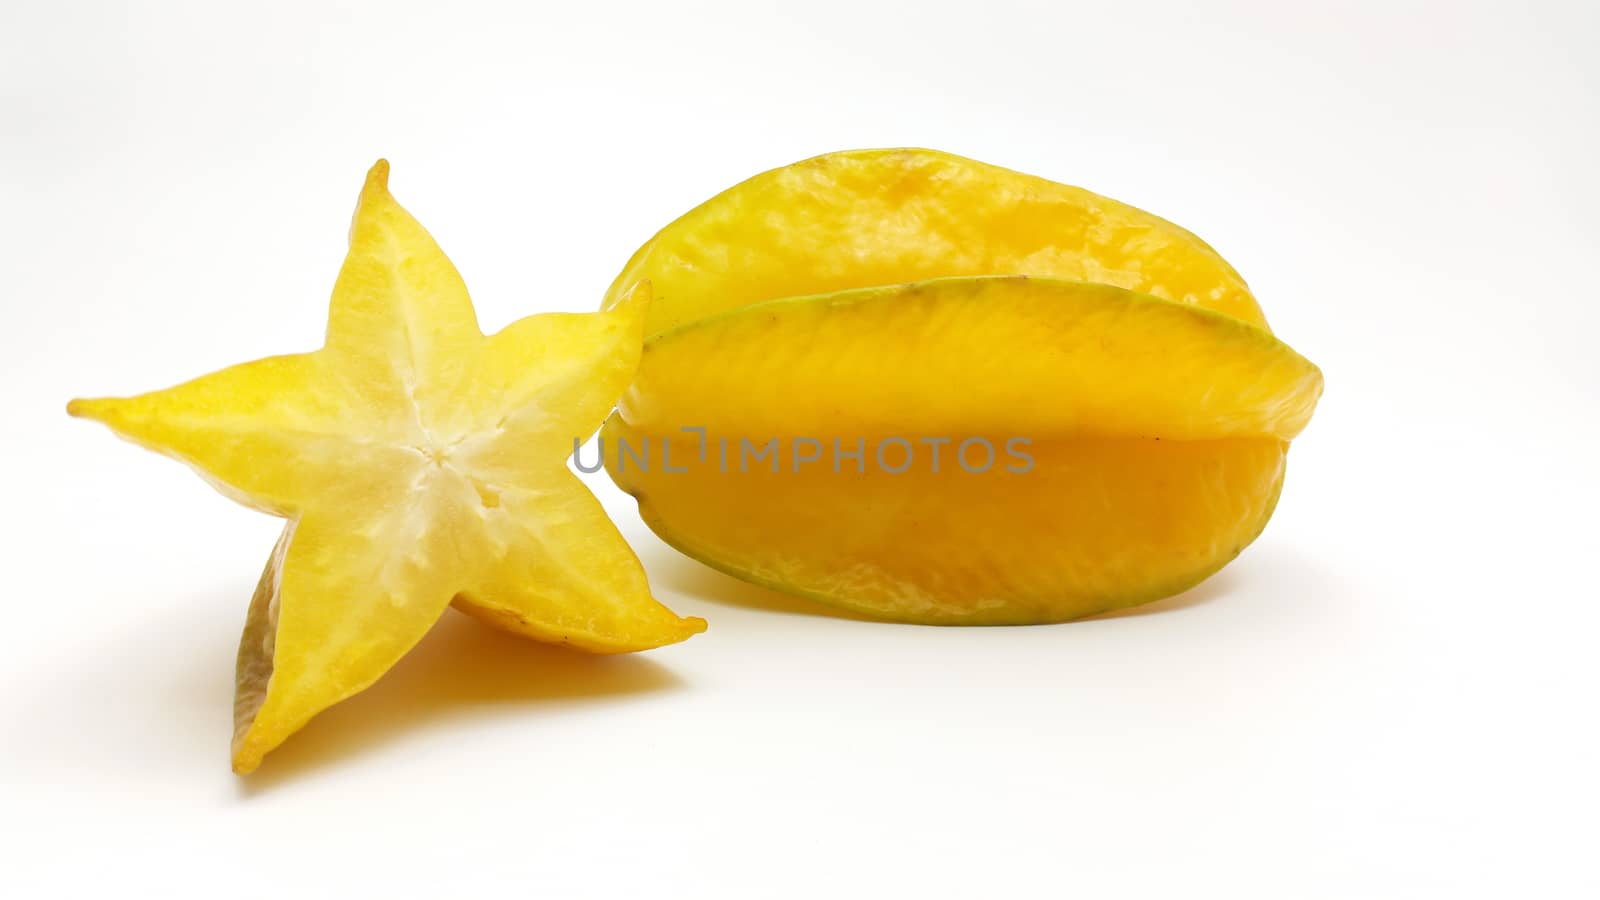 carambola - star fruit by arraymax